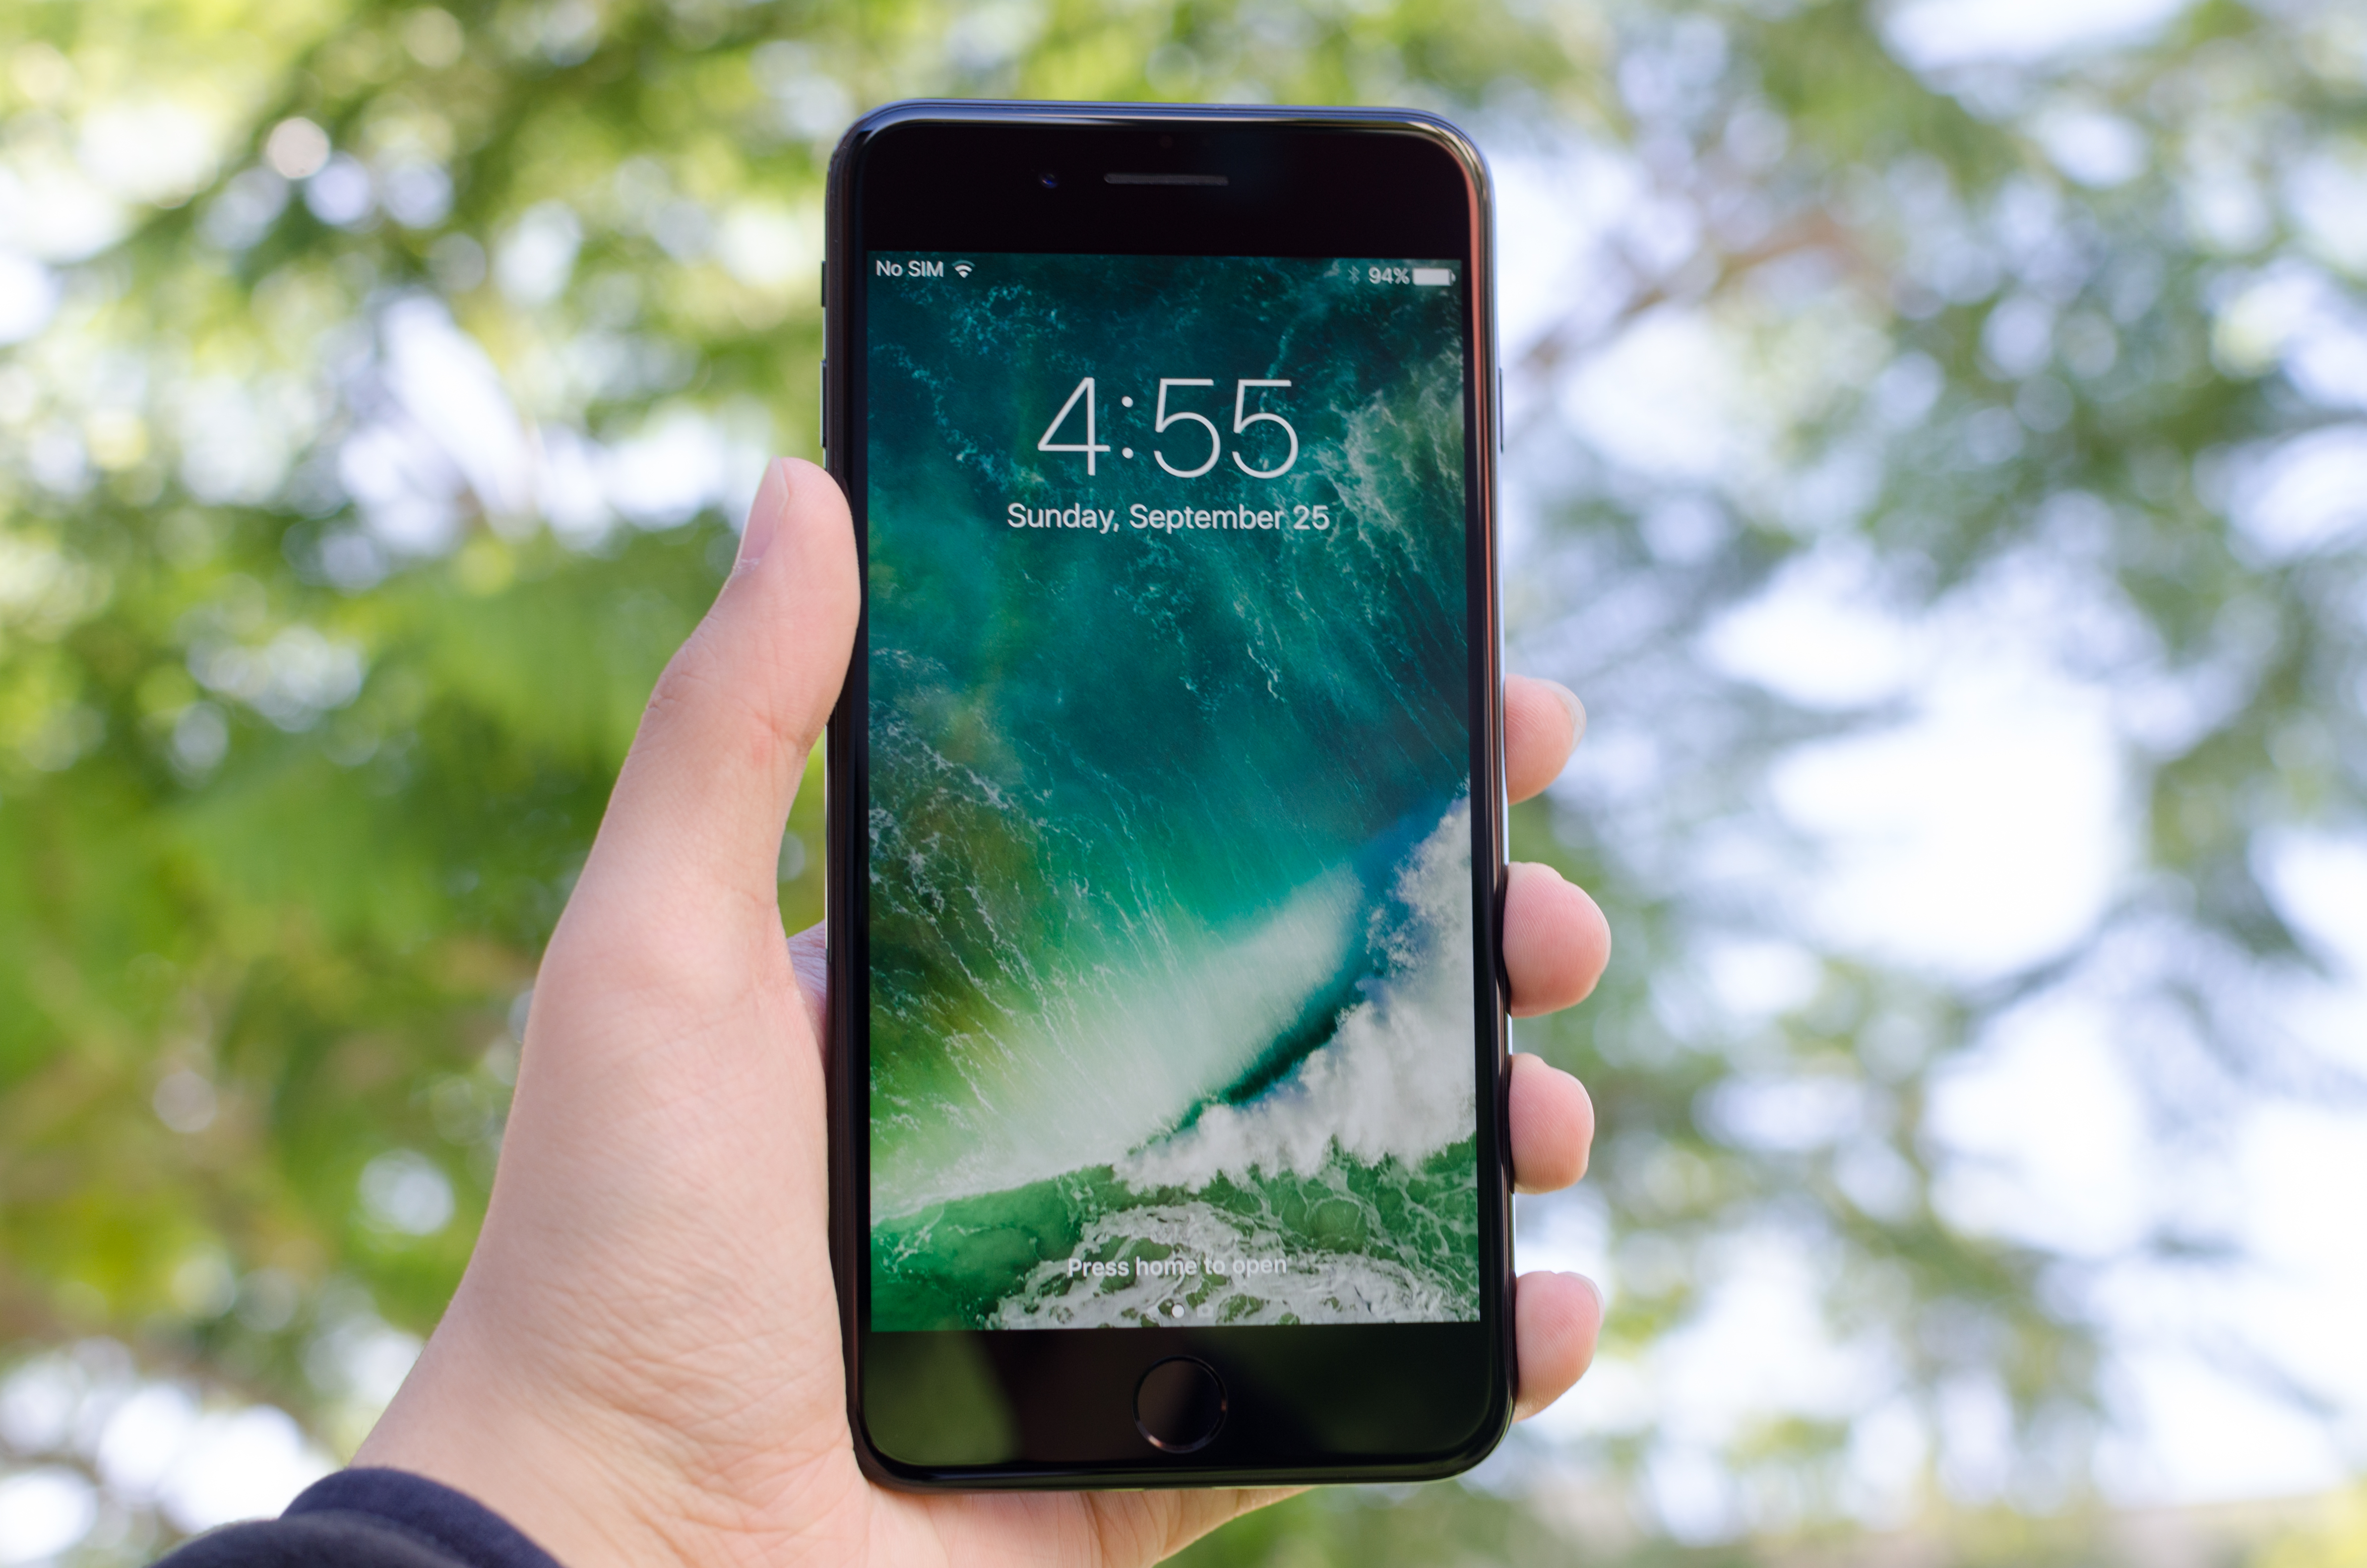 iPhone 7 Plus hands-on: A weekend full of adjustments